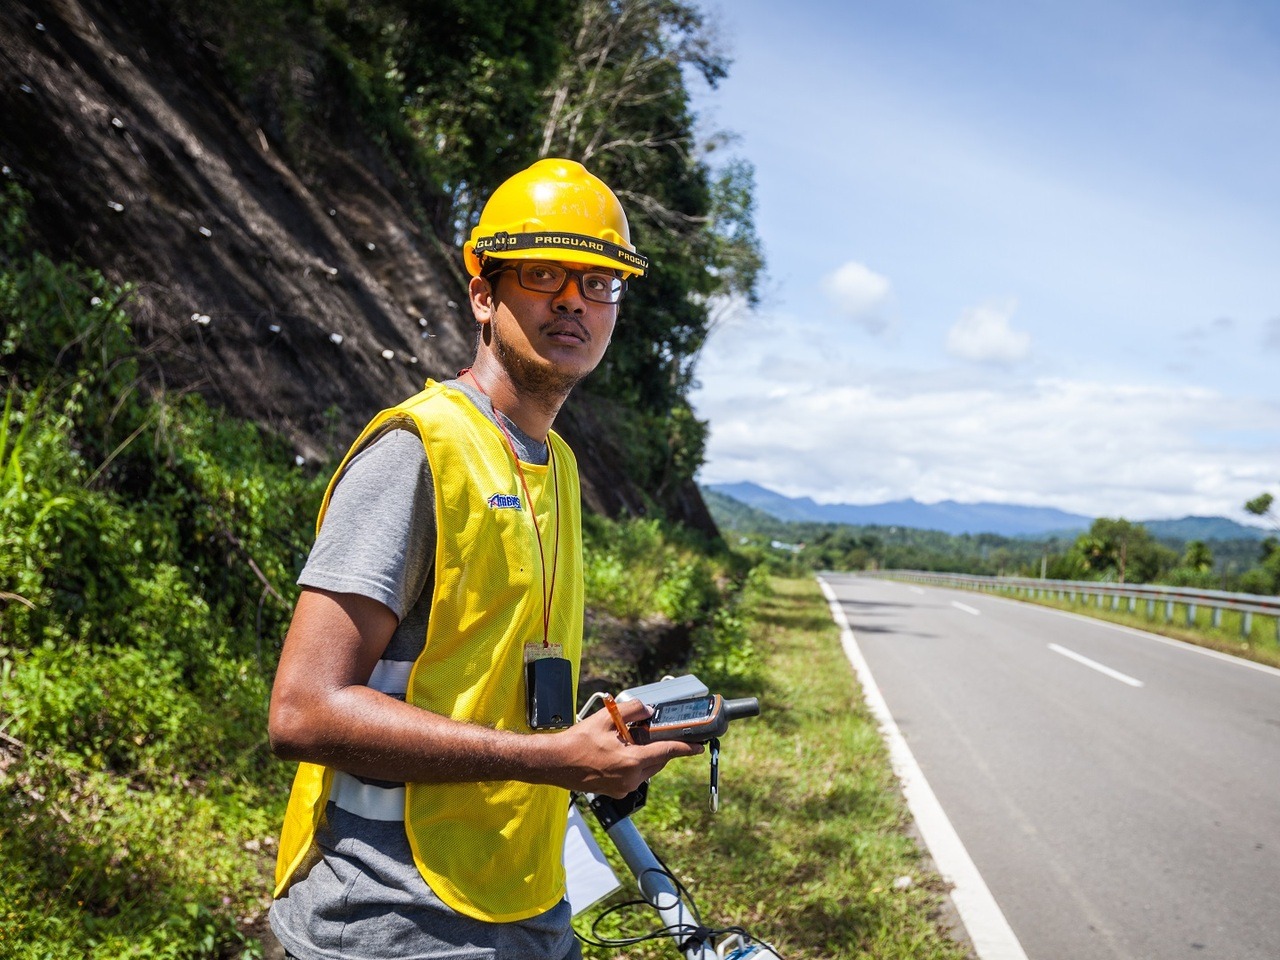 “I’ve often been asked about my lifetime ambition by many people, including my parents. Geology is my greatest passion, and through my interactions with my mentors at Curtin Malaysia, Dr. Afroz Ahmad Shah, Dr. Nagarajan Ramasamy and Dr. M. V....